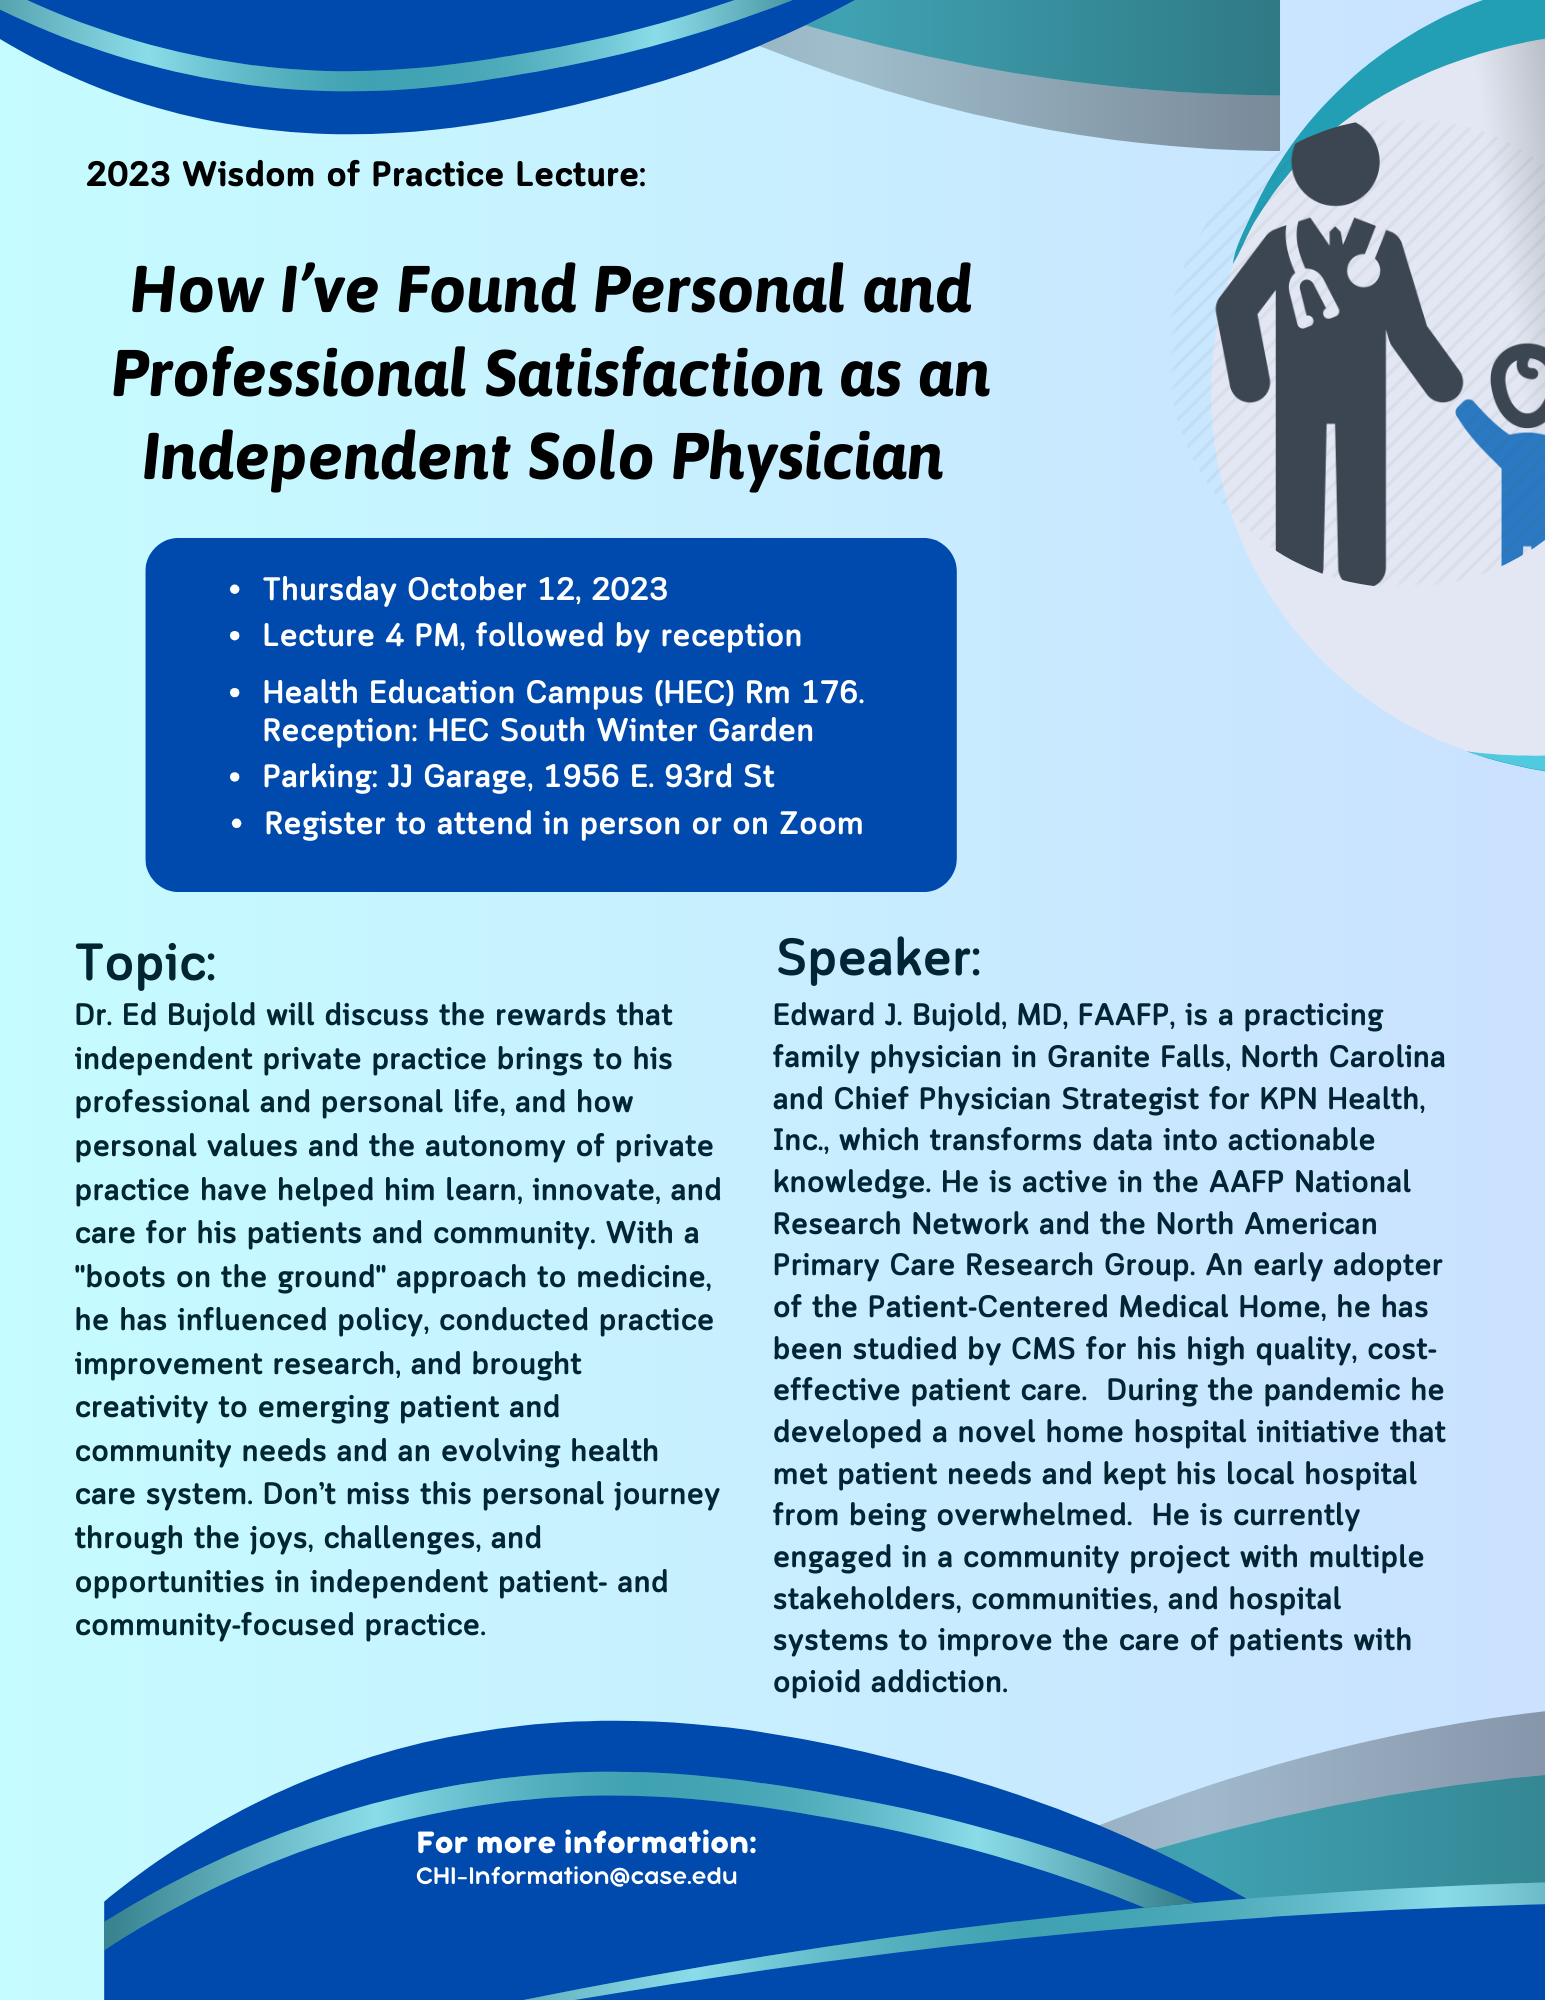 Flyer describing lecture of independent solo practice, no registration